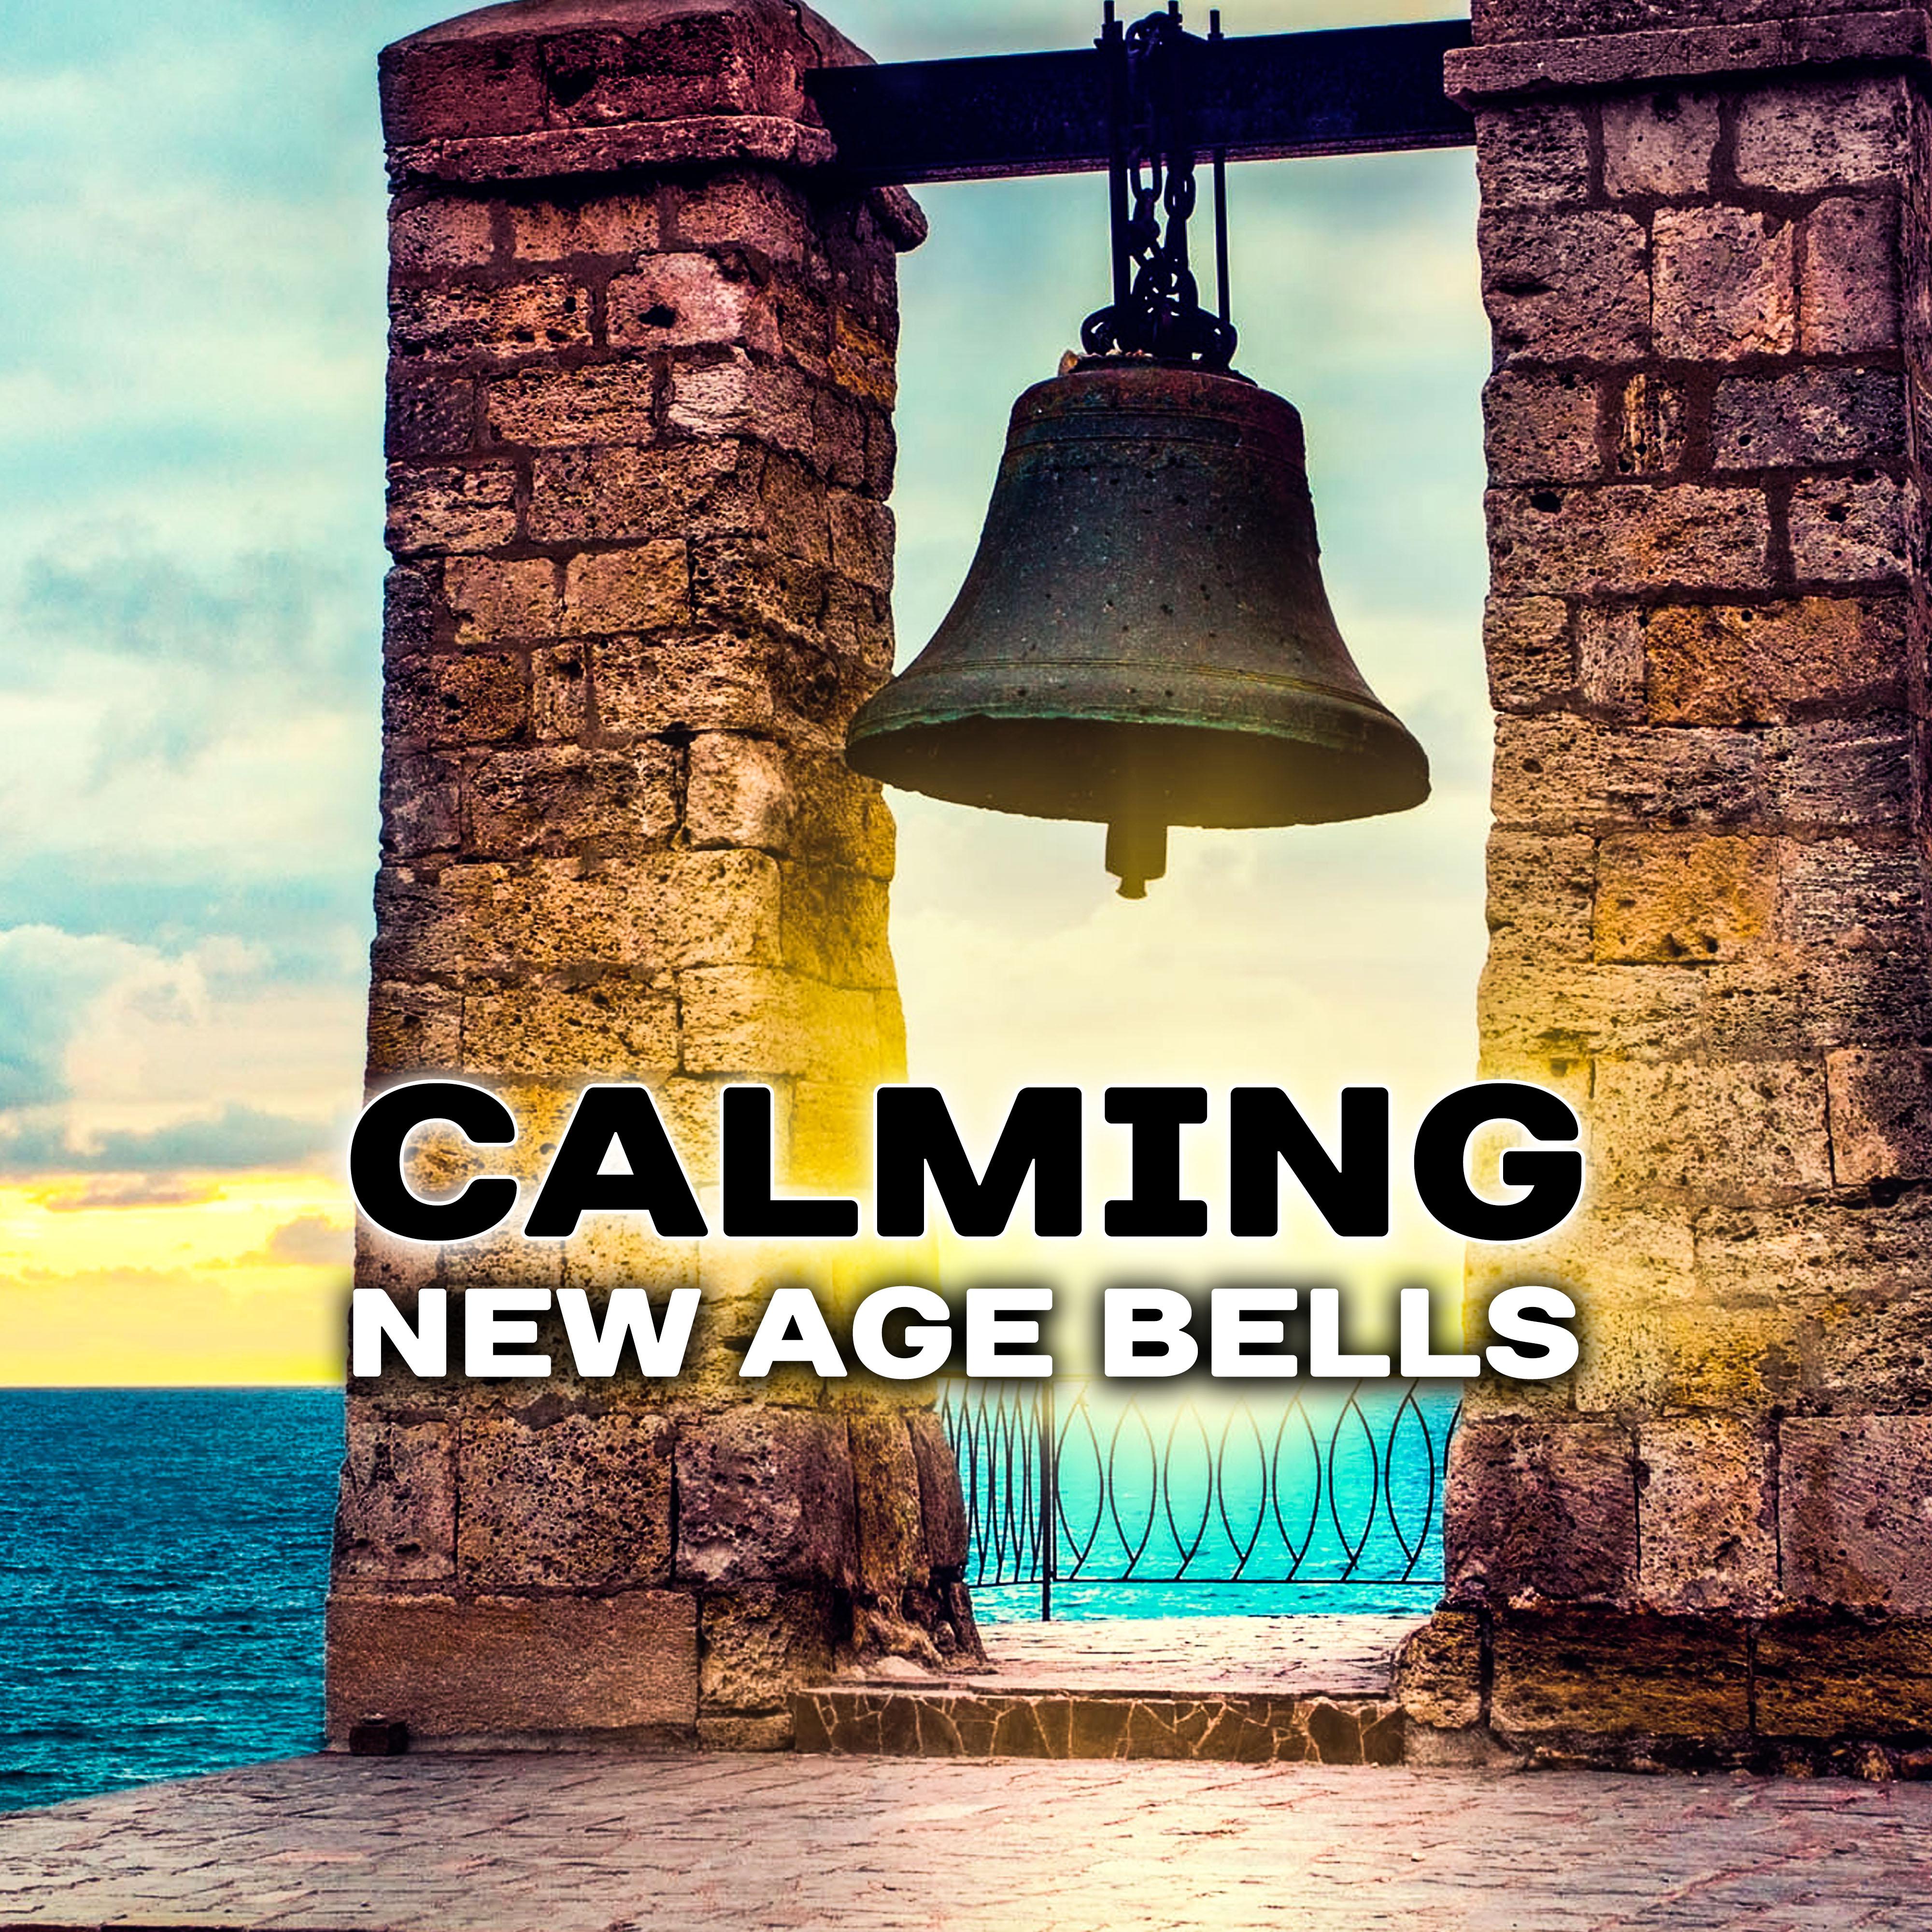 Calming New Age Bells – Calm Down with Soft Sounds, Easy Listening, Stress Relief, Peaceful Music